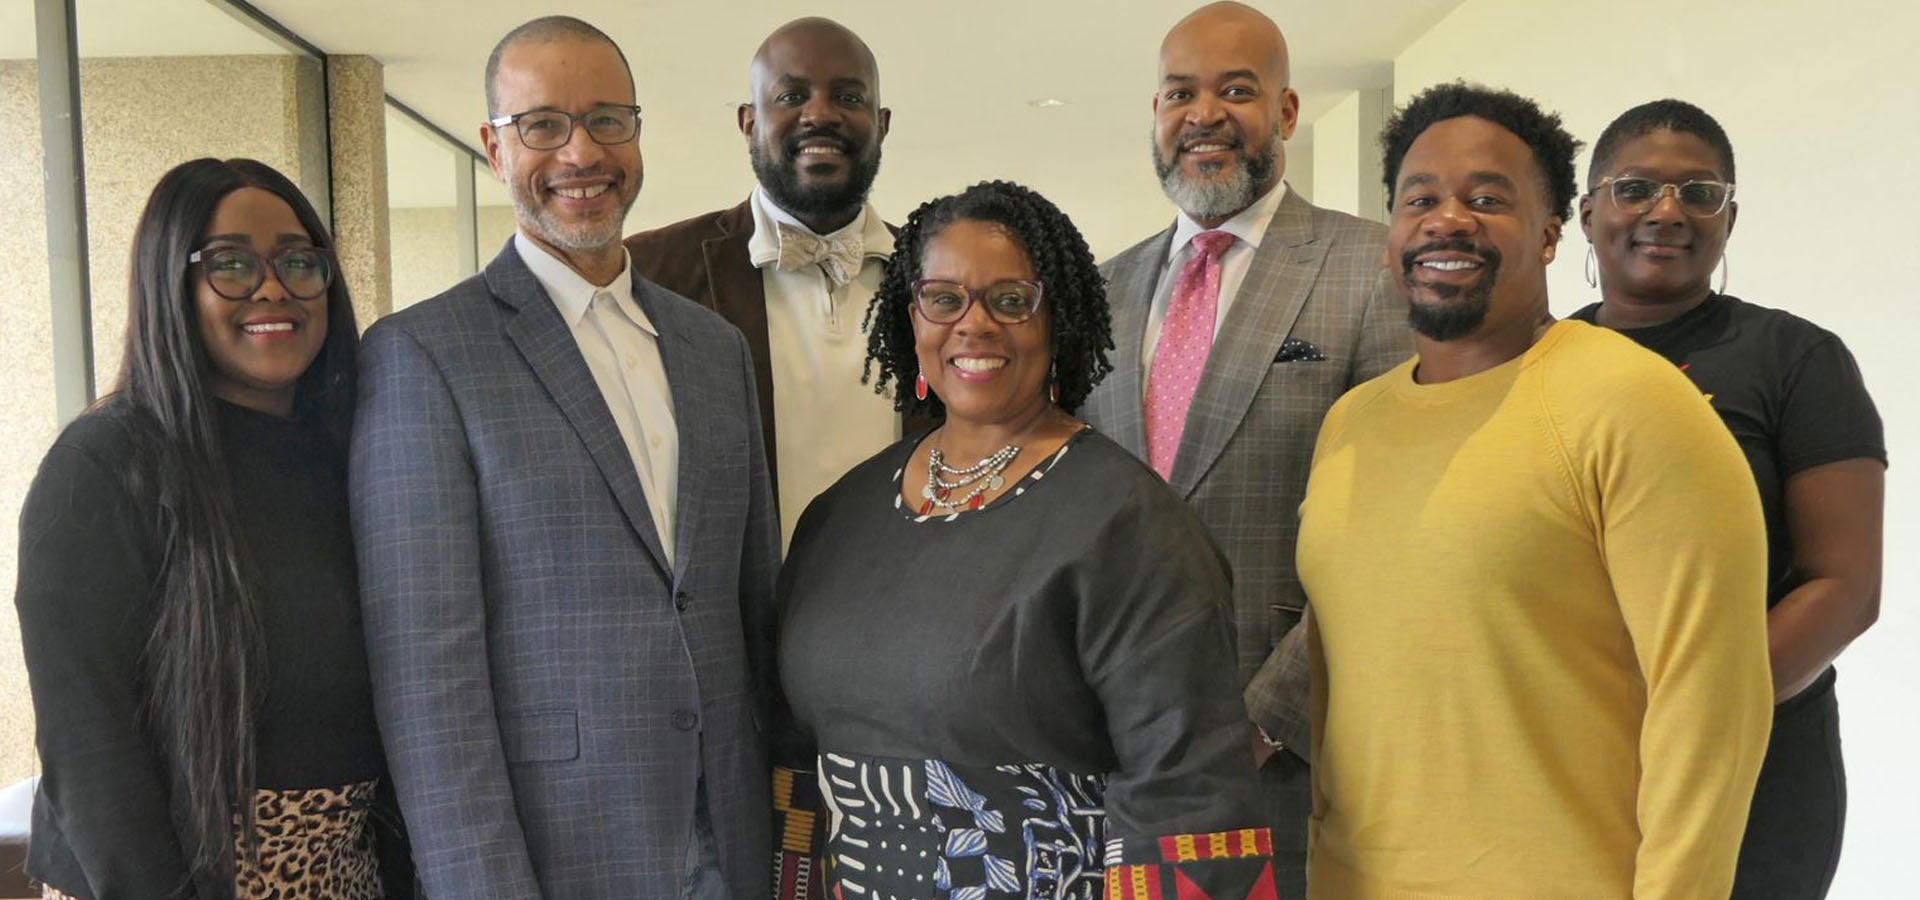 Rev. Dr. Thomas & Rev. Dr. Buggs with PhD Cohort 3 students